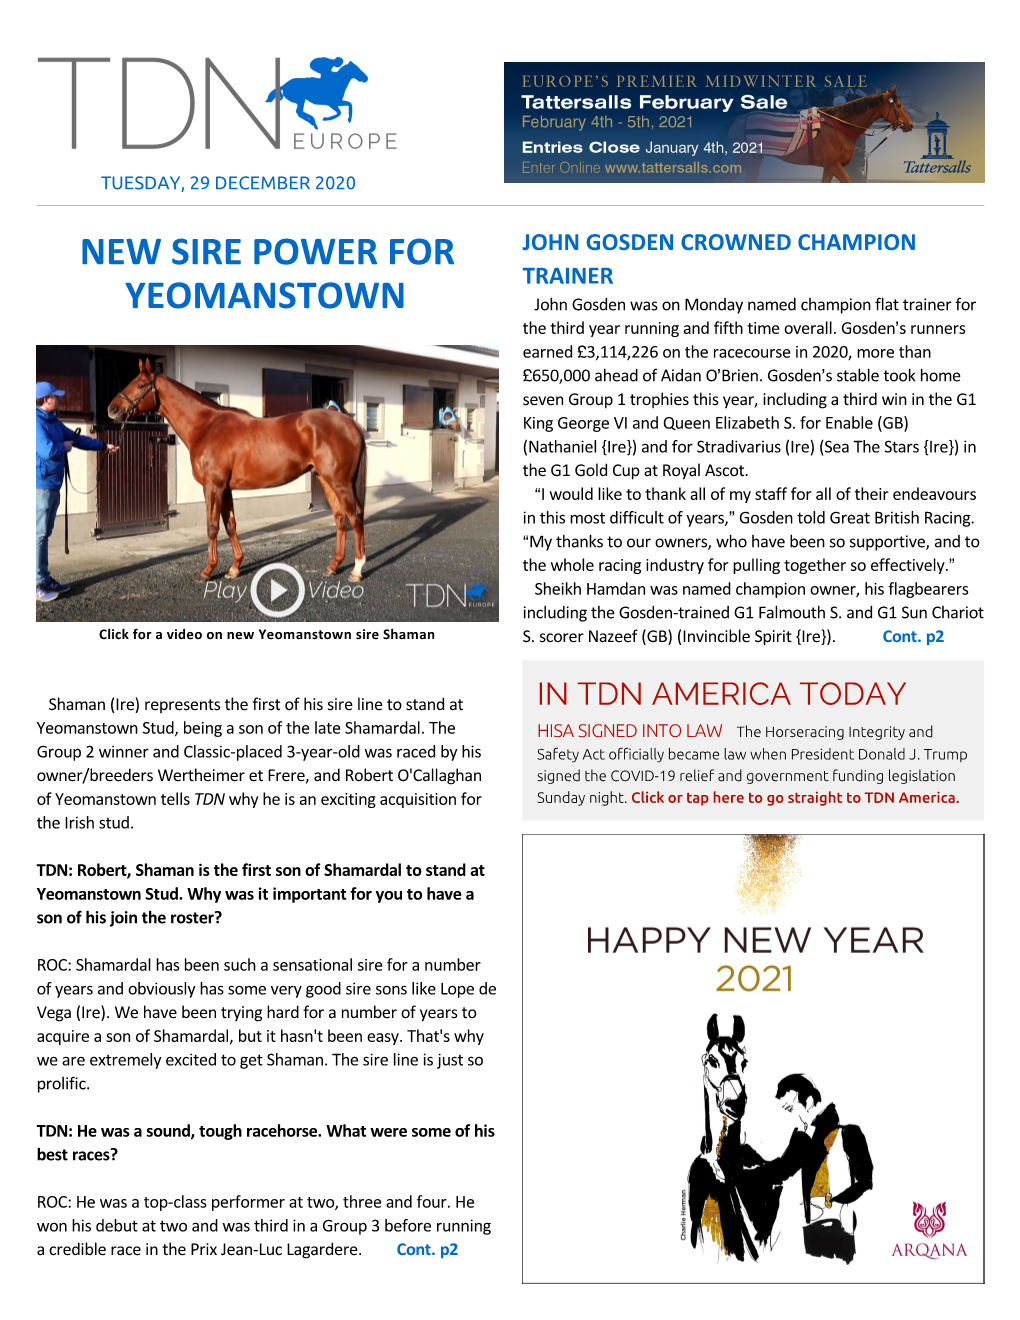 Tdn Europe • Page 2 of 5 • Thetdn.Com Tuesday • 29 December 2020